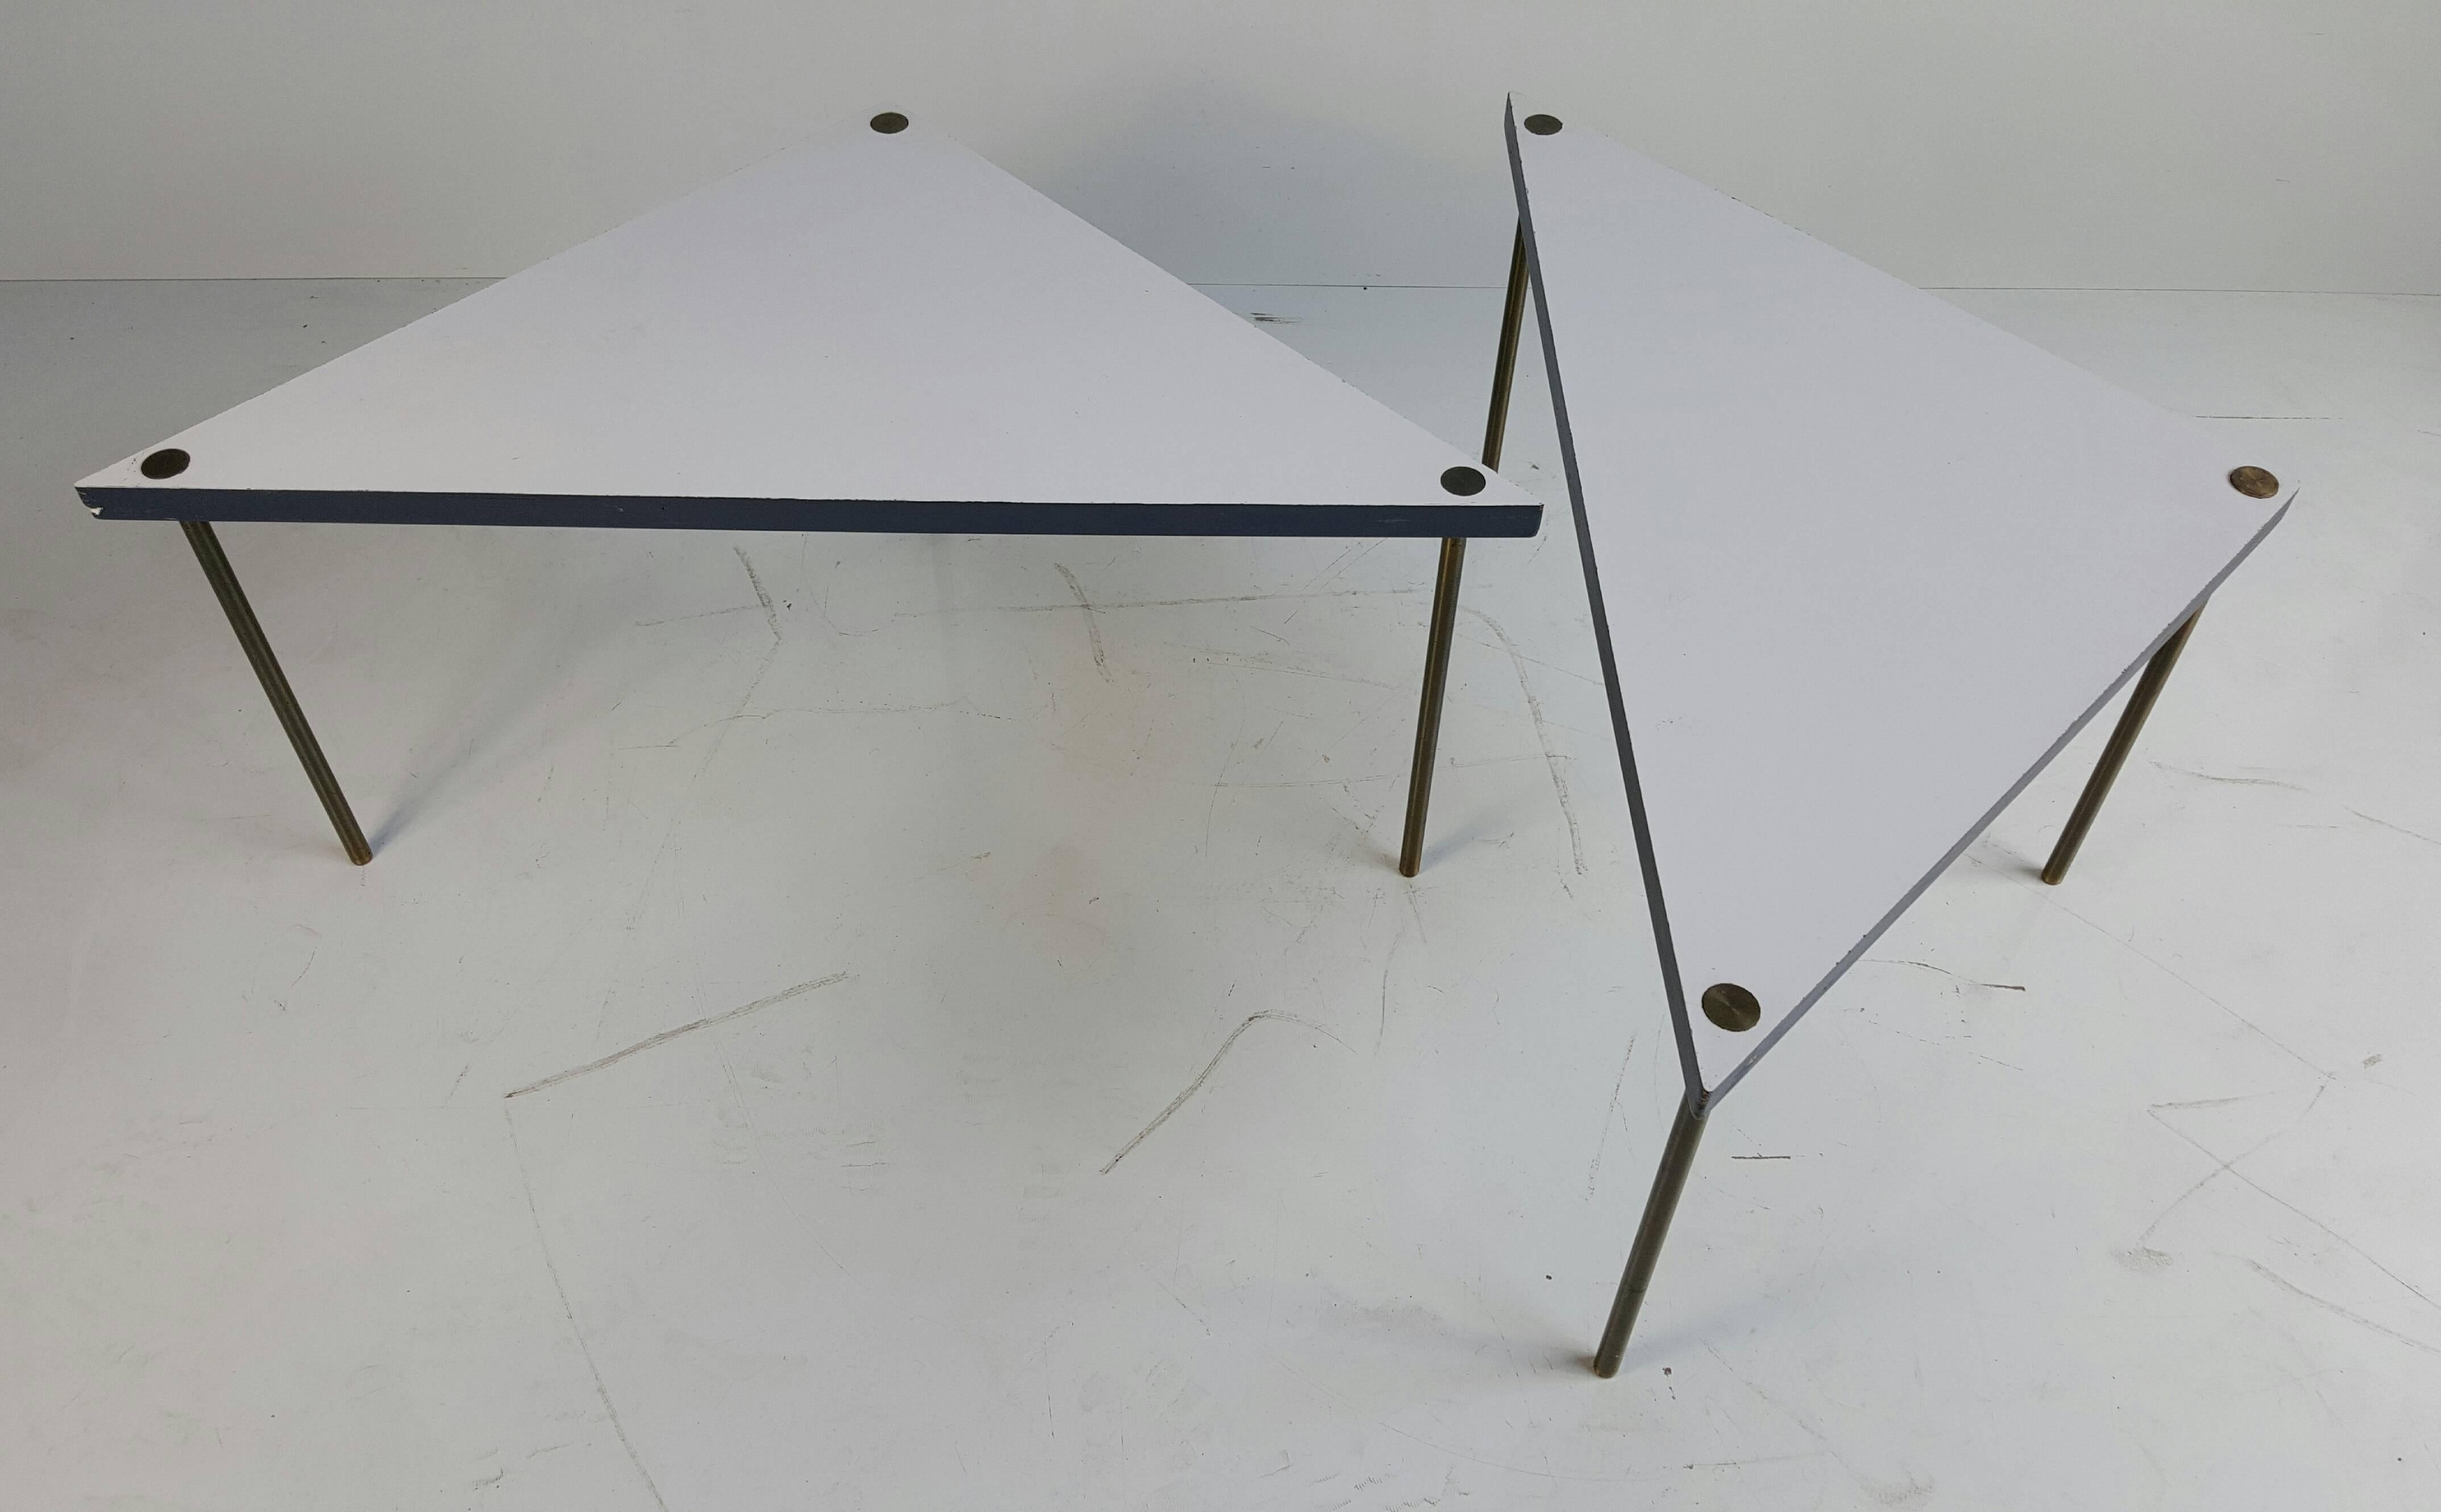 Matched pair of Italian tables, white and blue lacquer, pencil brass legs, Extremely versatile, endless configurations, coffee table, end tables, pedestals, or stands.